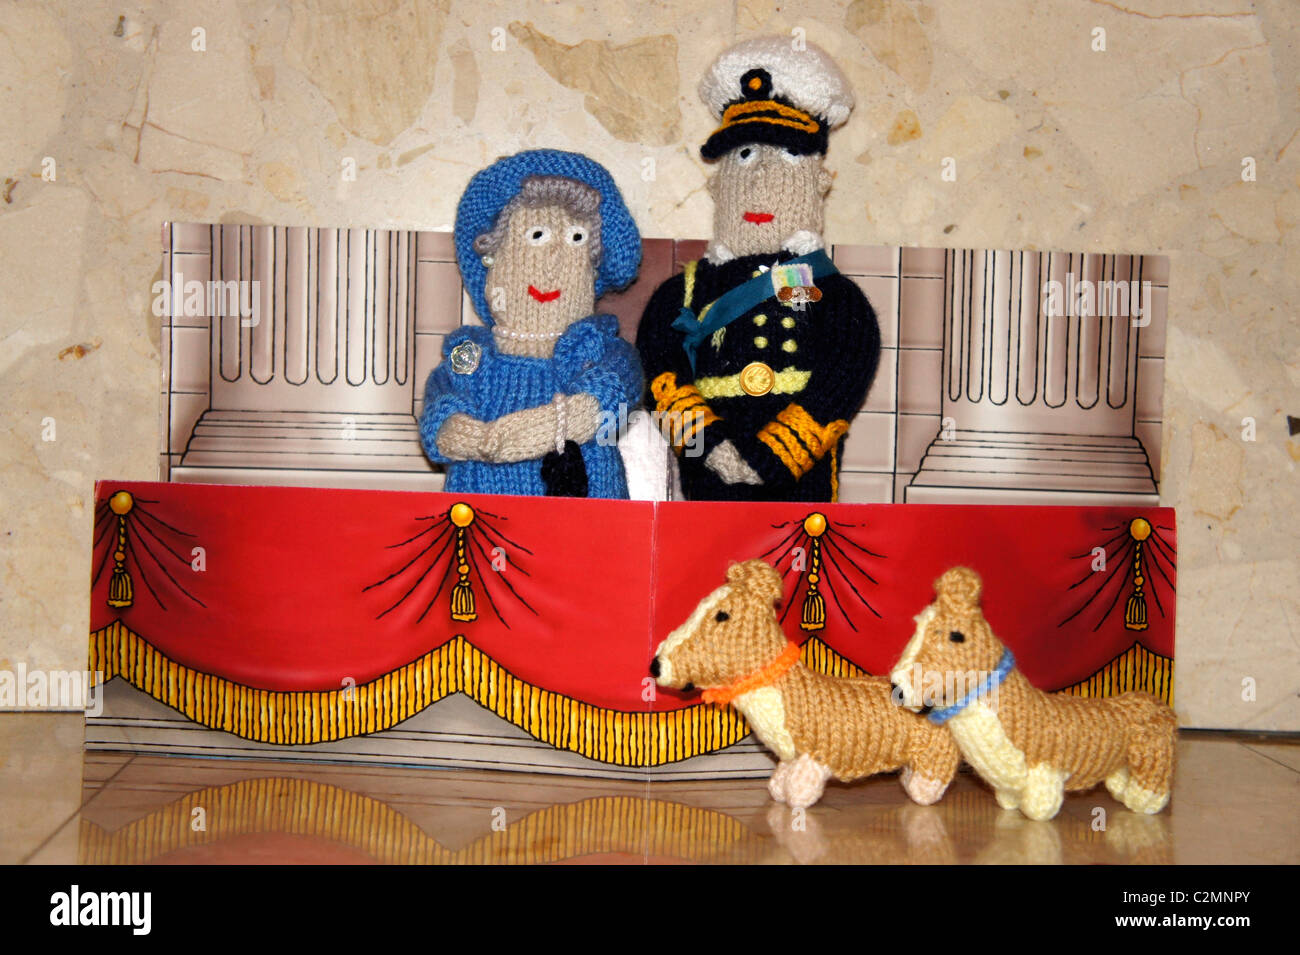 HRH Queen Elizabeth, Prince Phillip and corgi's, knitted figures. Royal wedding. Stock Photo